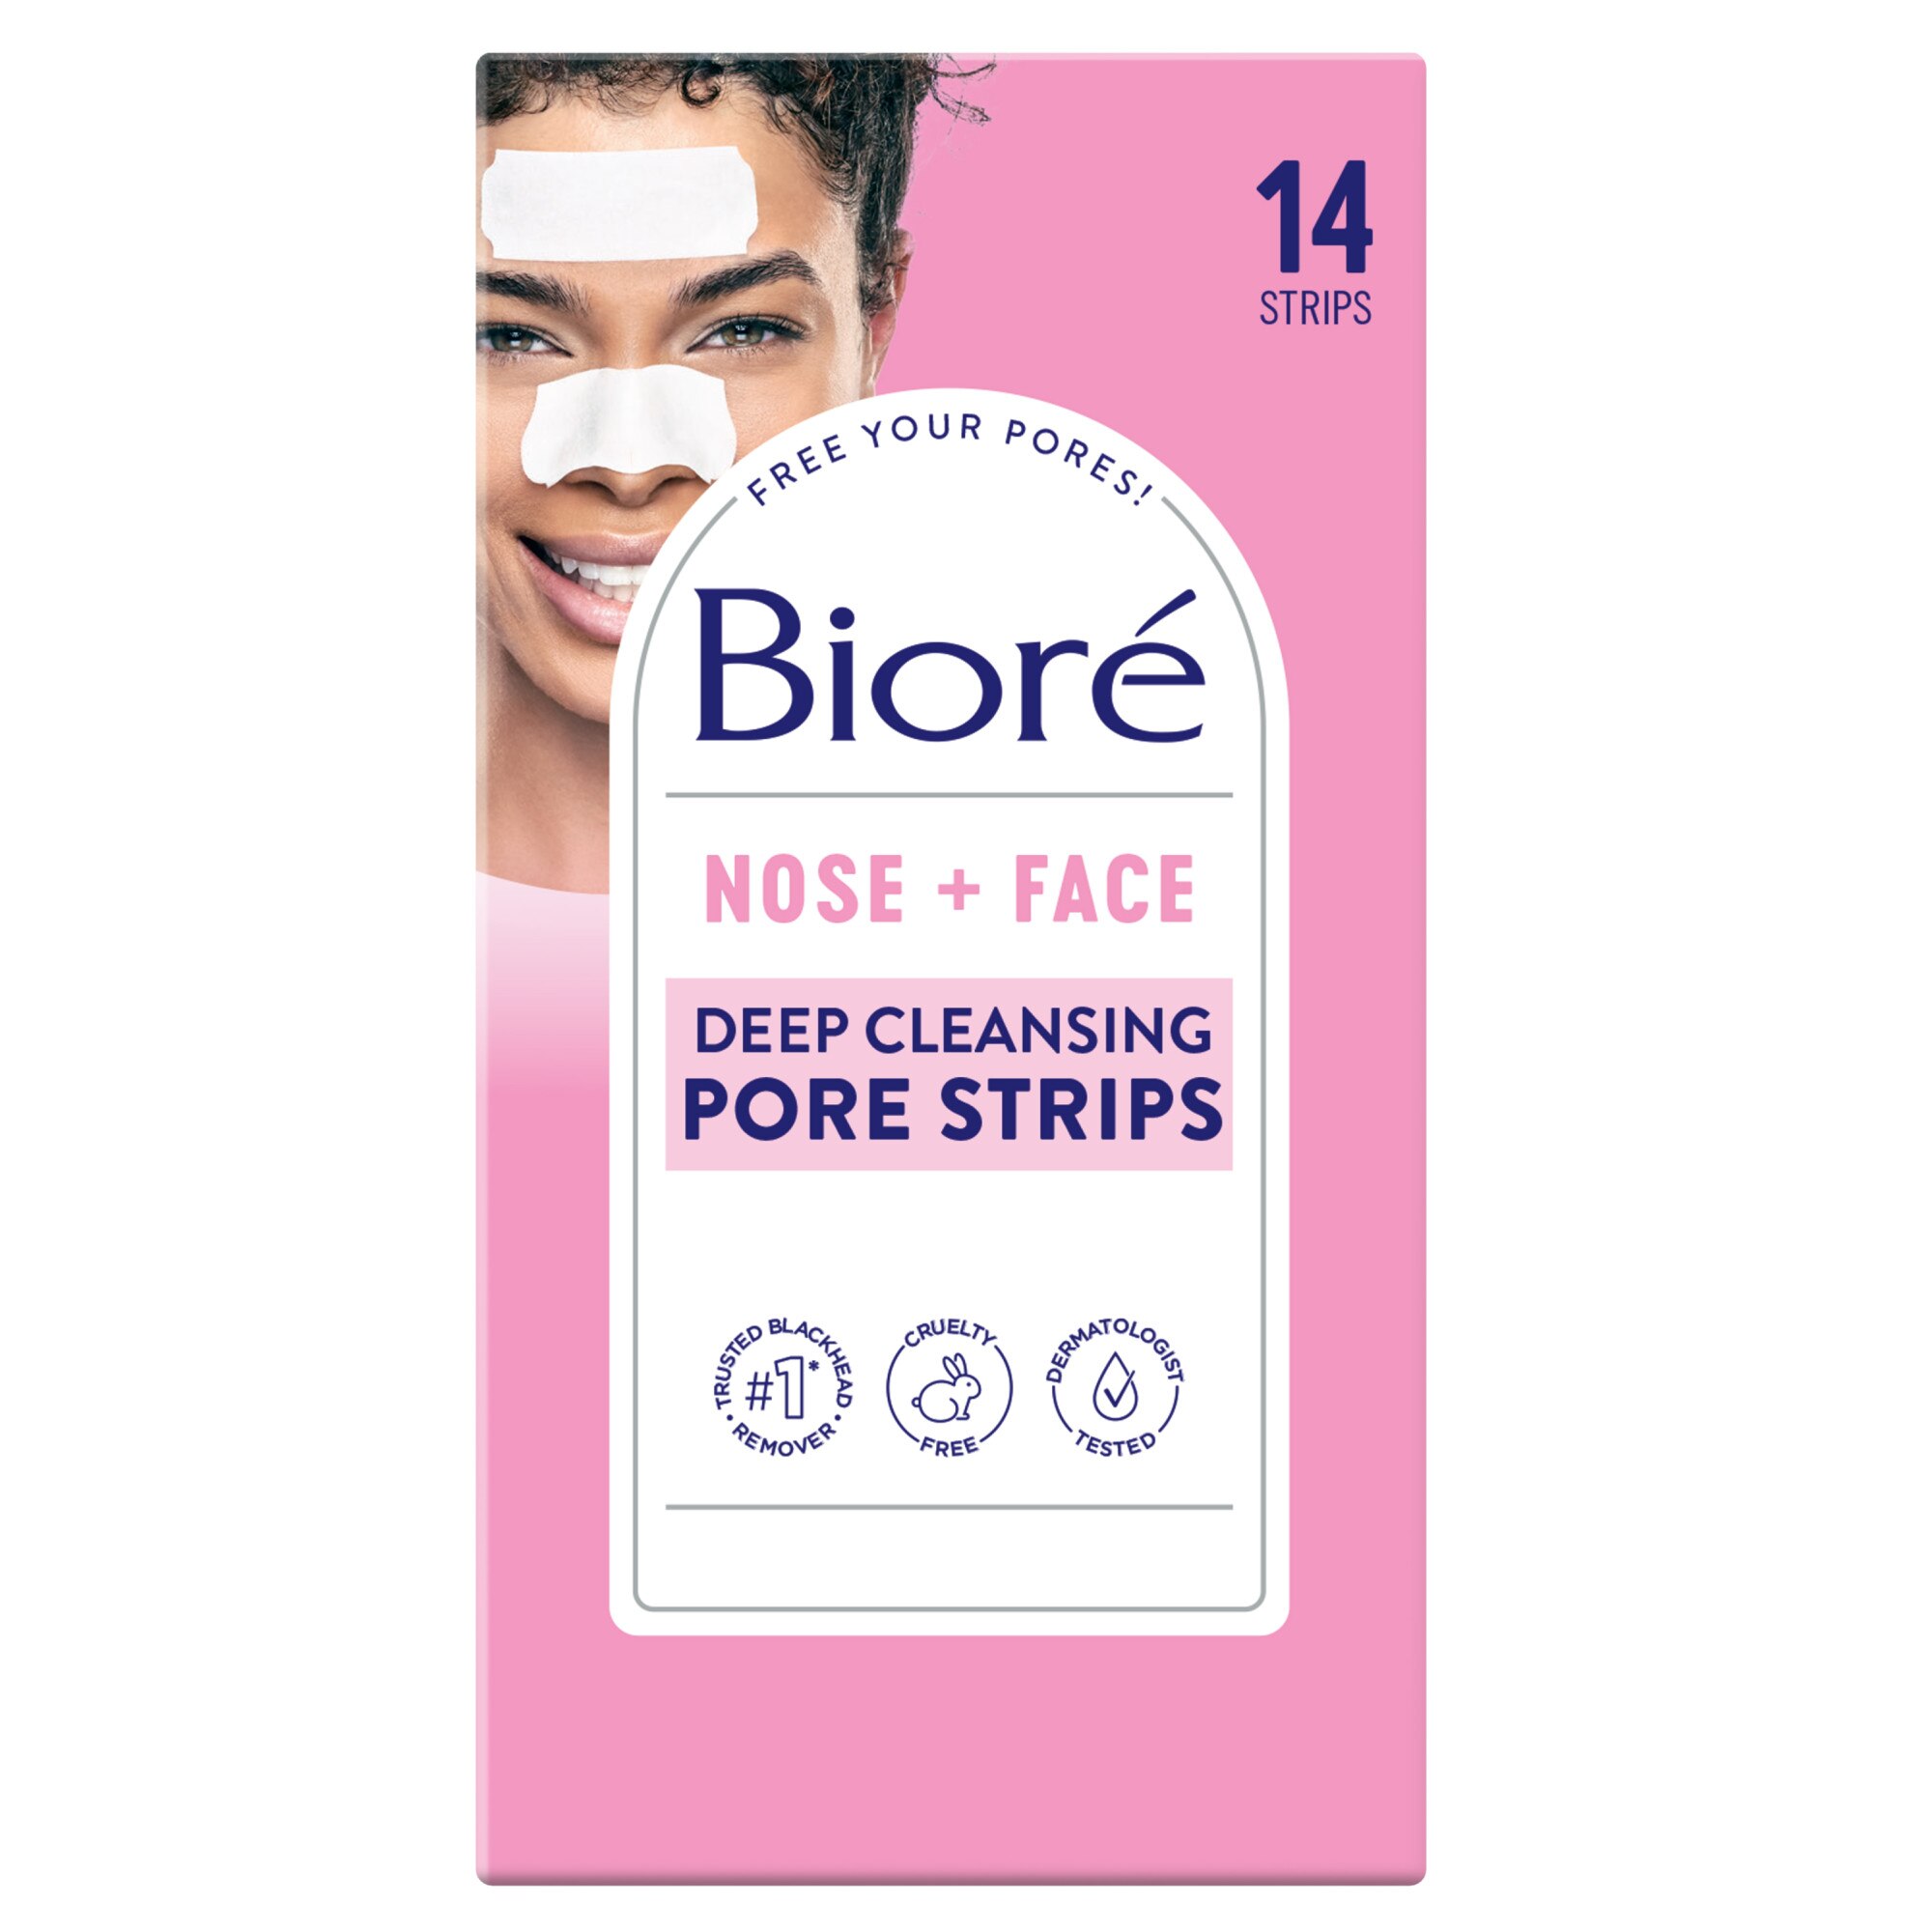 Biore Nose+Face Deep Cleansing Pore Strips with Instant Blackhead Removal and Pore Unclogging